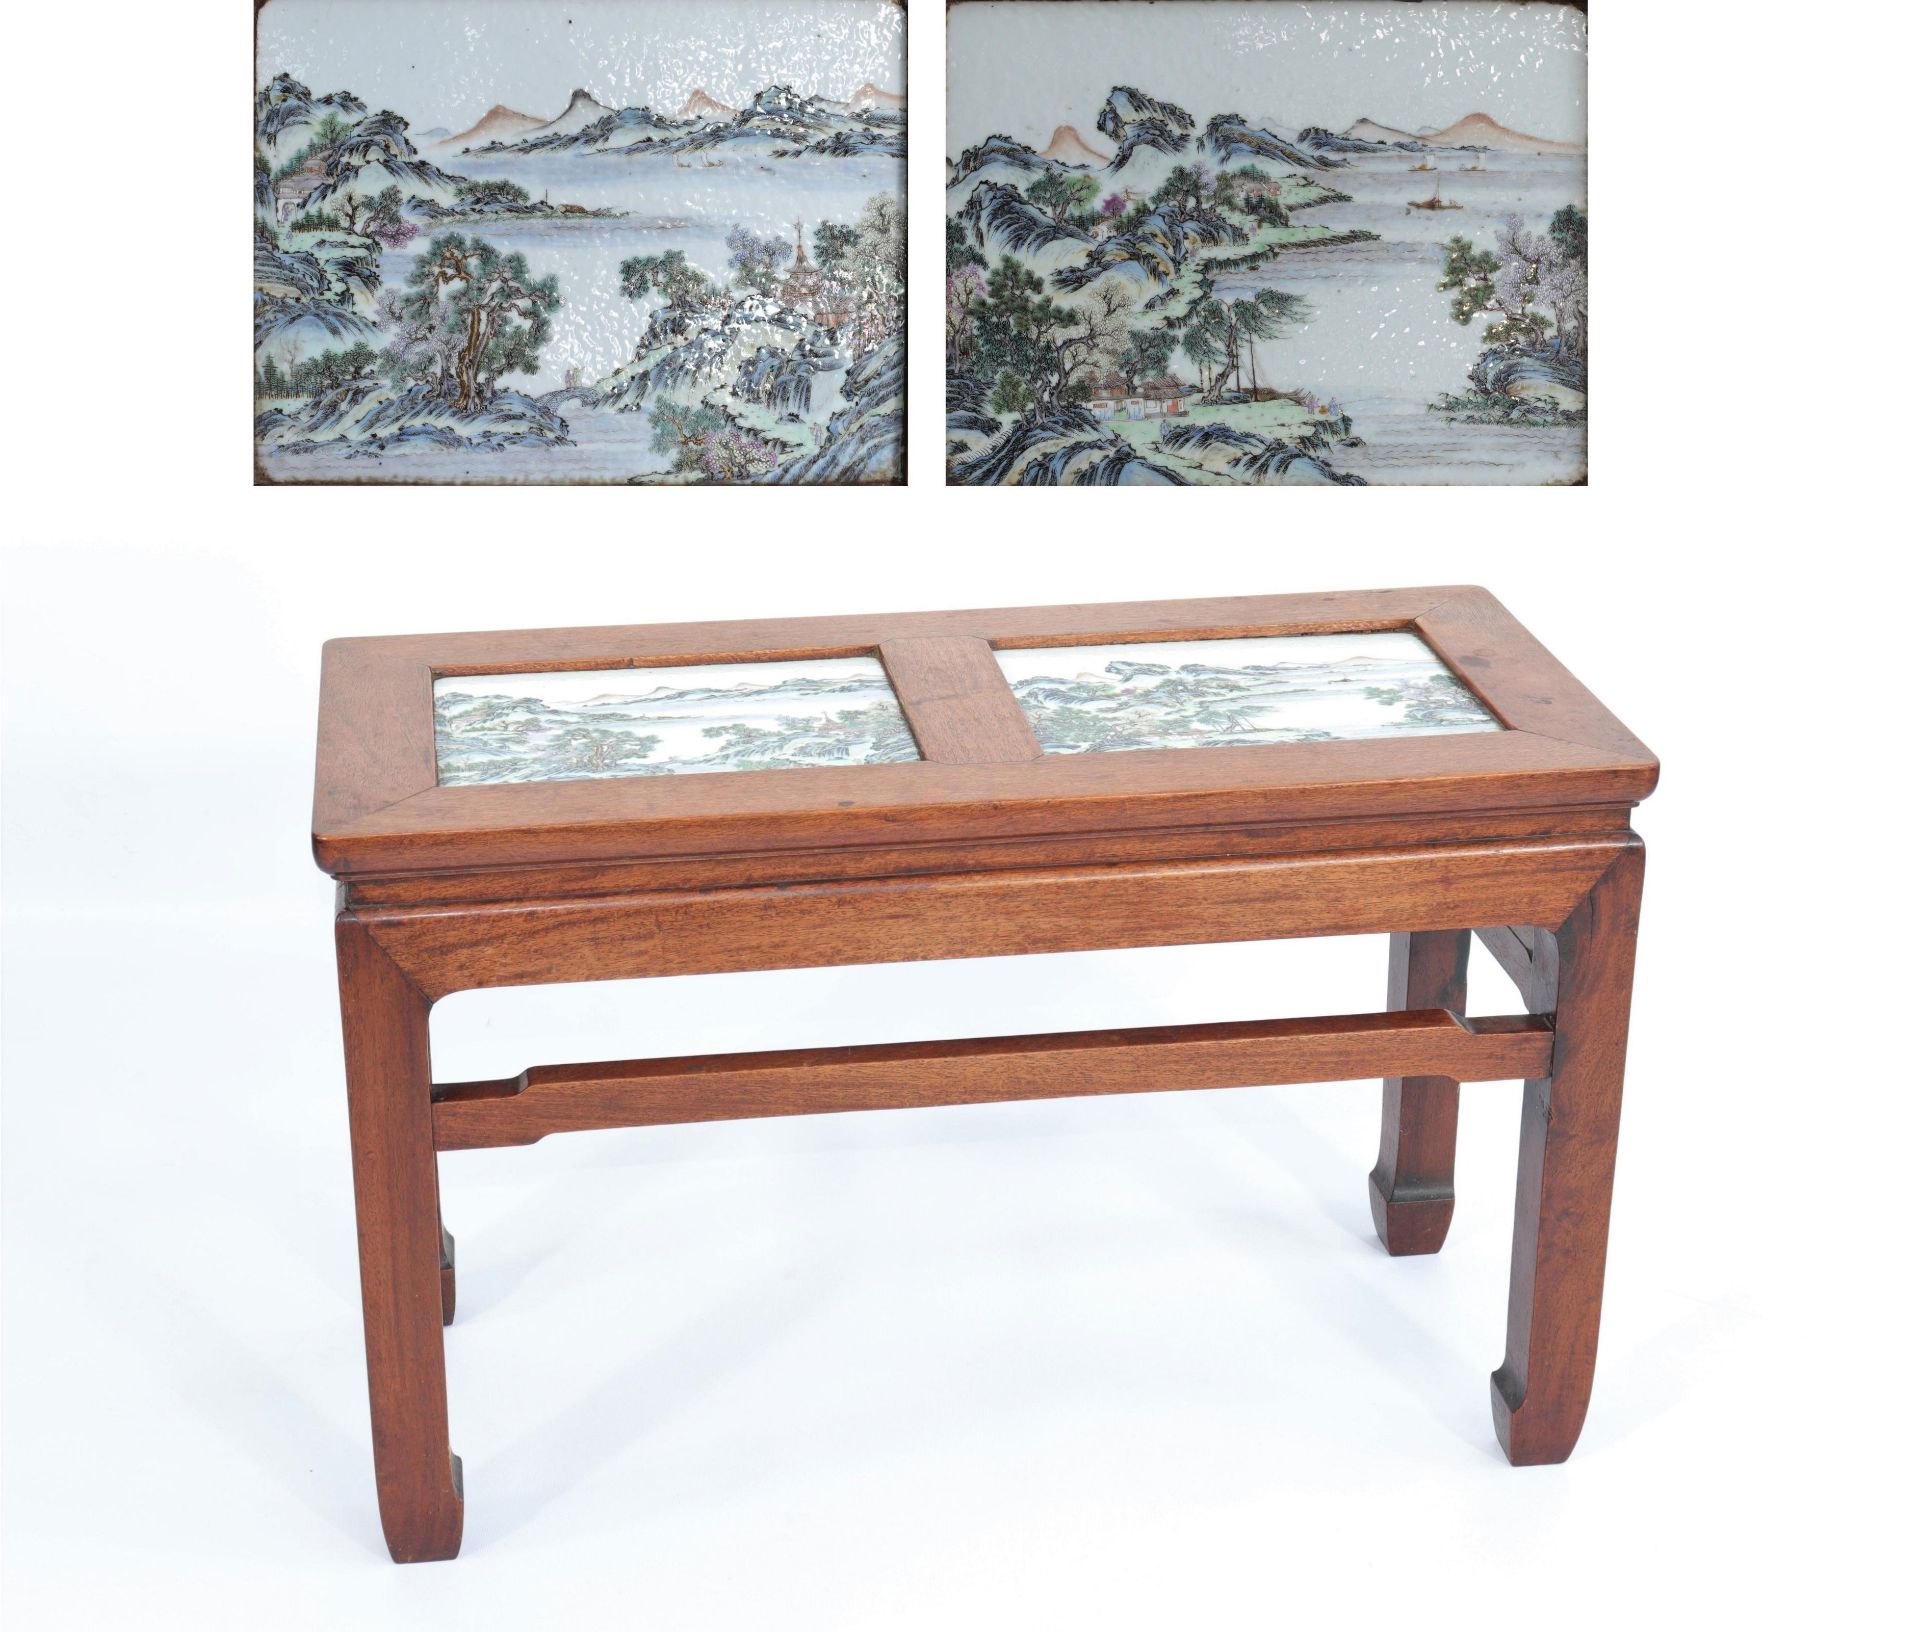 China rare table decorated with porcelain panels decor of landscapes - republic period